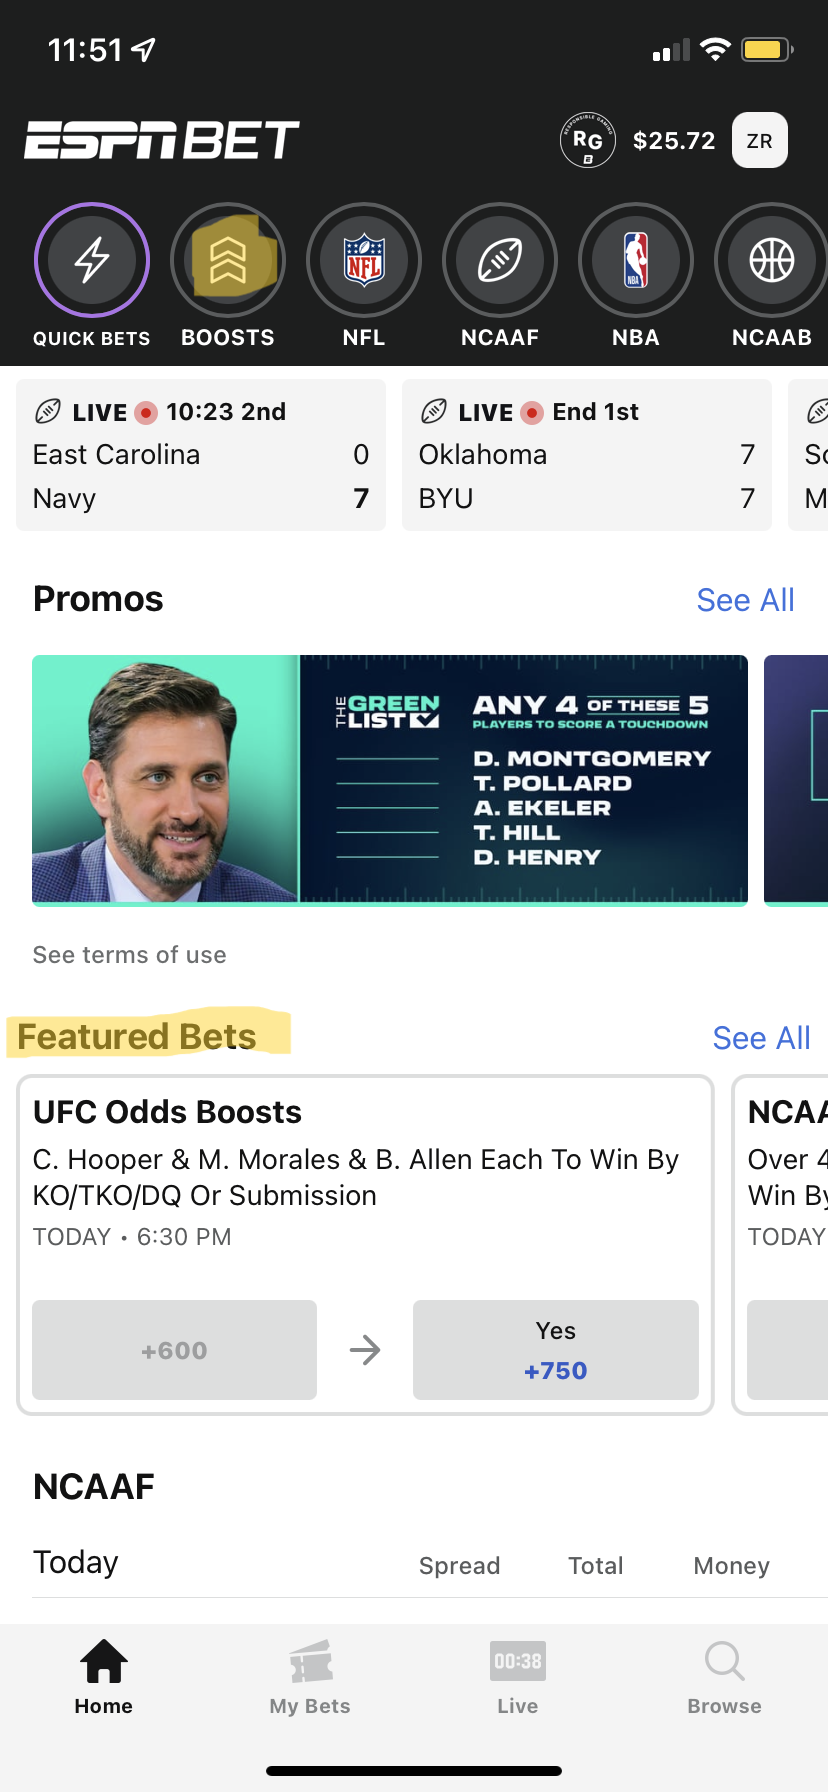 ESPN Bet app with the featured bets and odds boosts highlighted